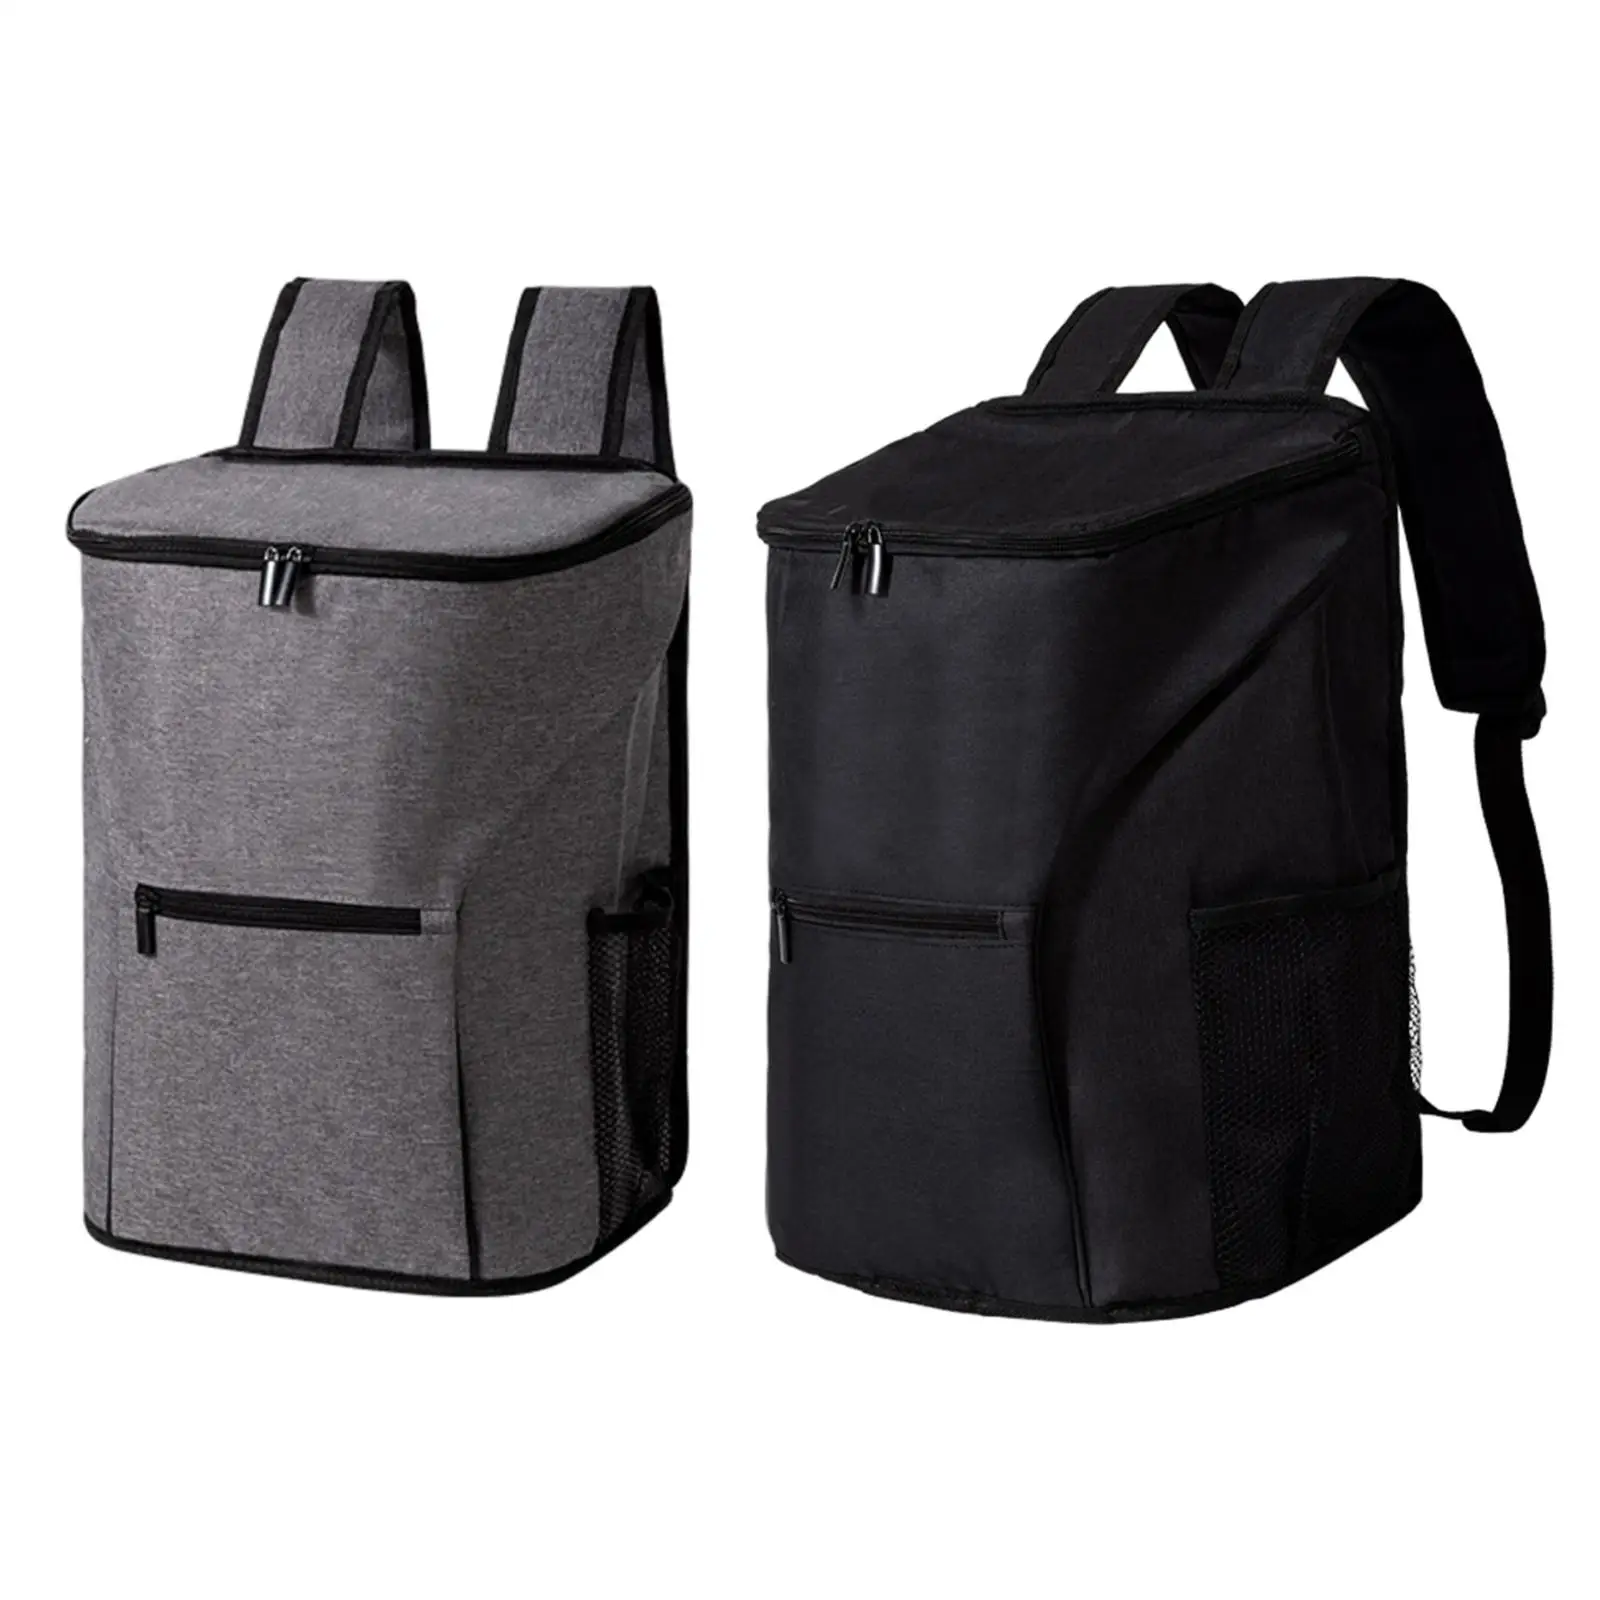 Thermal Backpack Adults Large Insulated Cooler Bag for Outdoor Travel